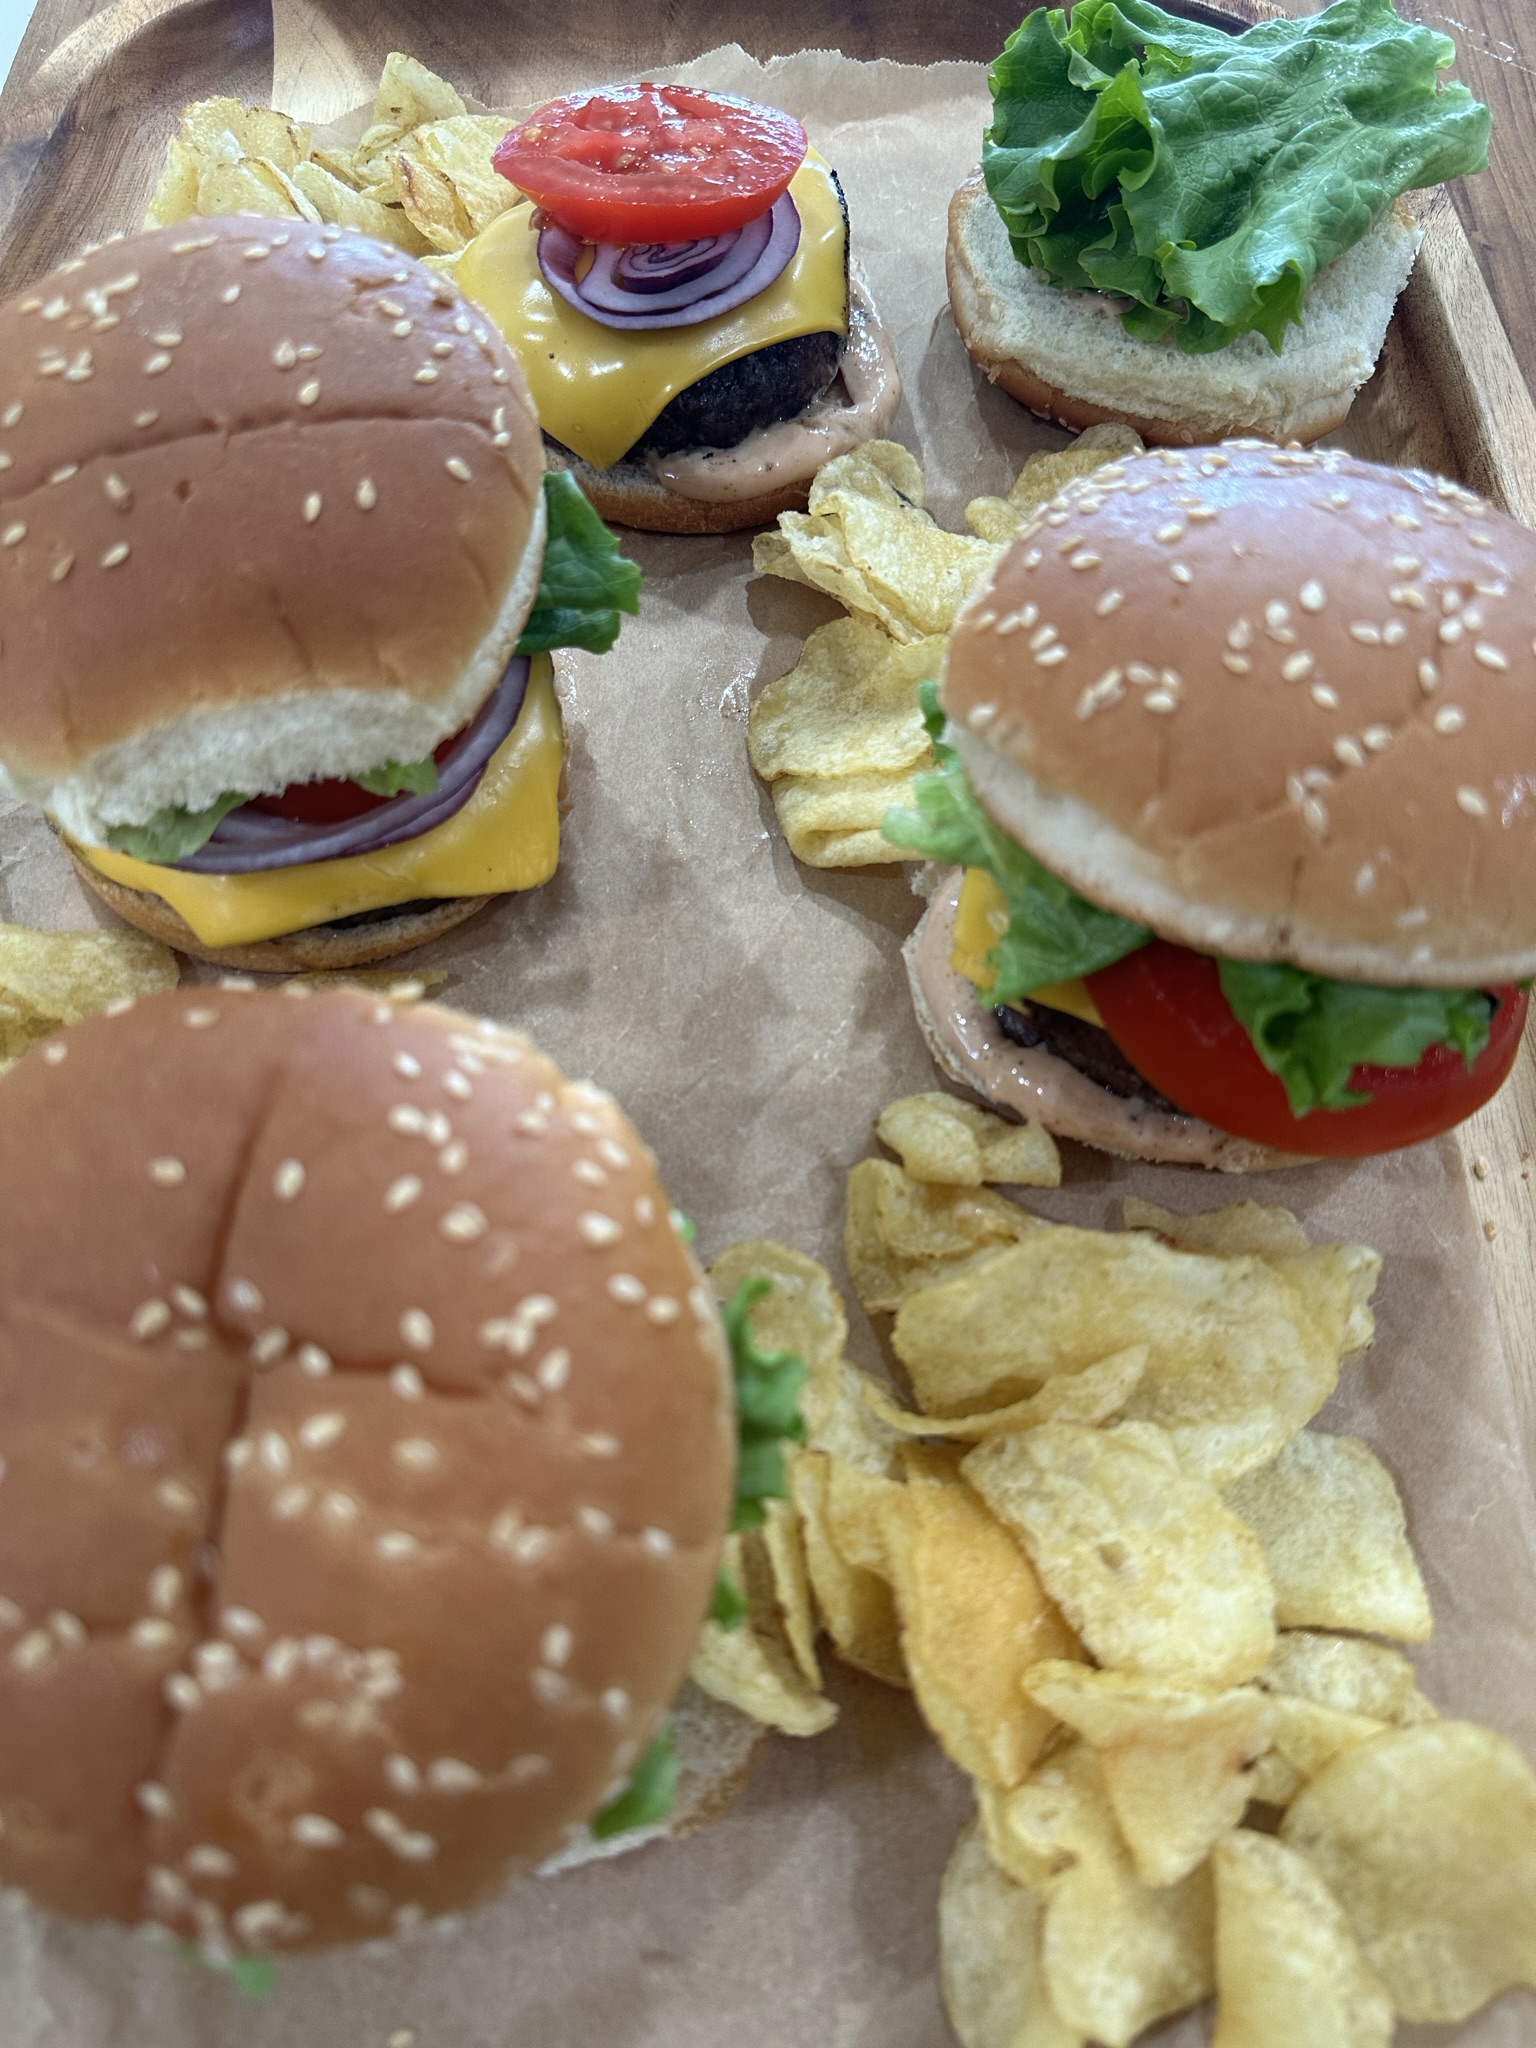 A tray of hamburgers and chips on the table.